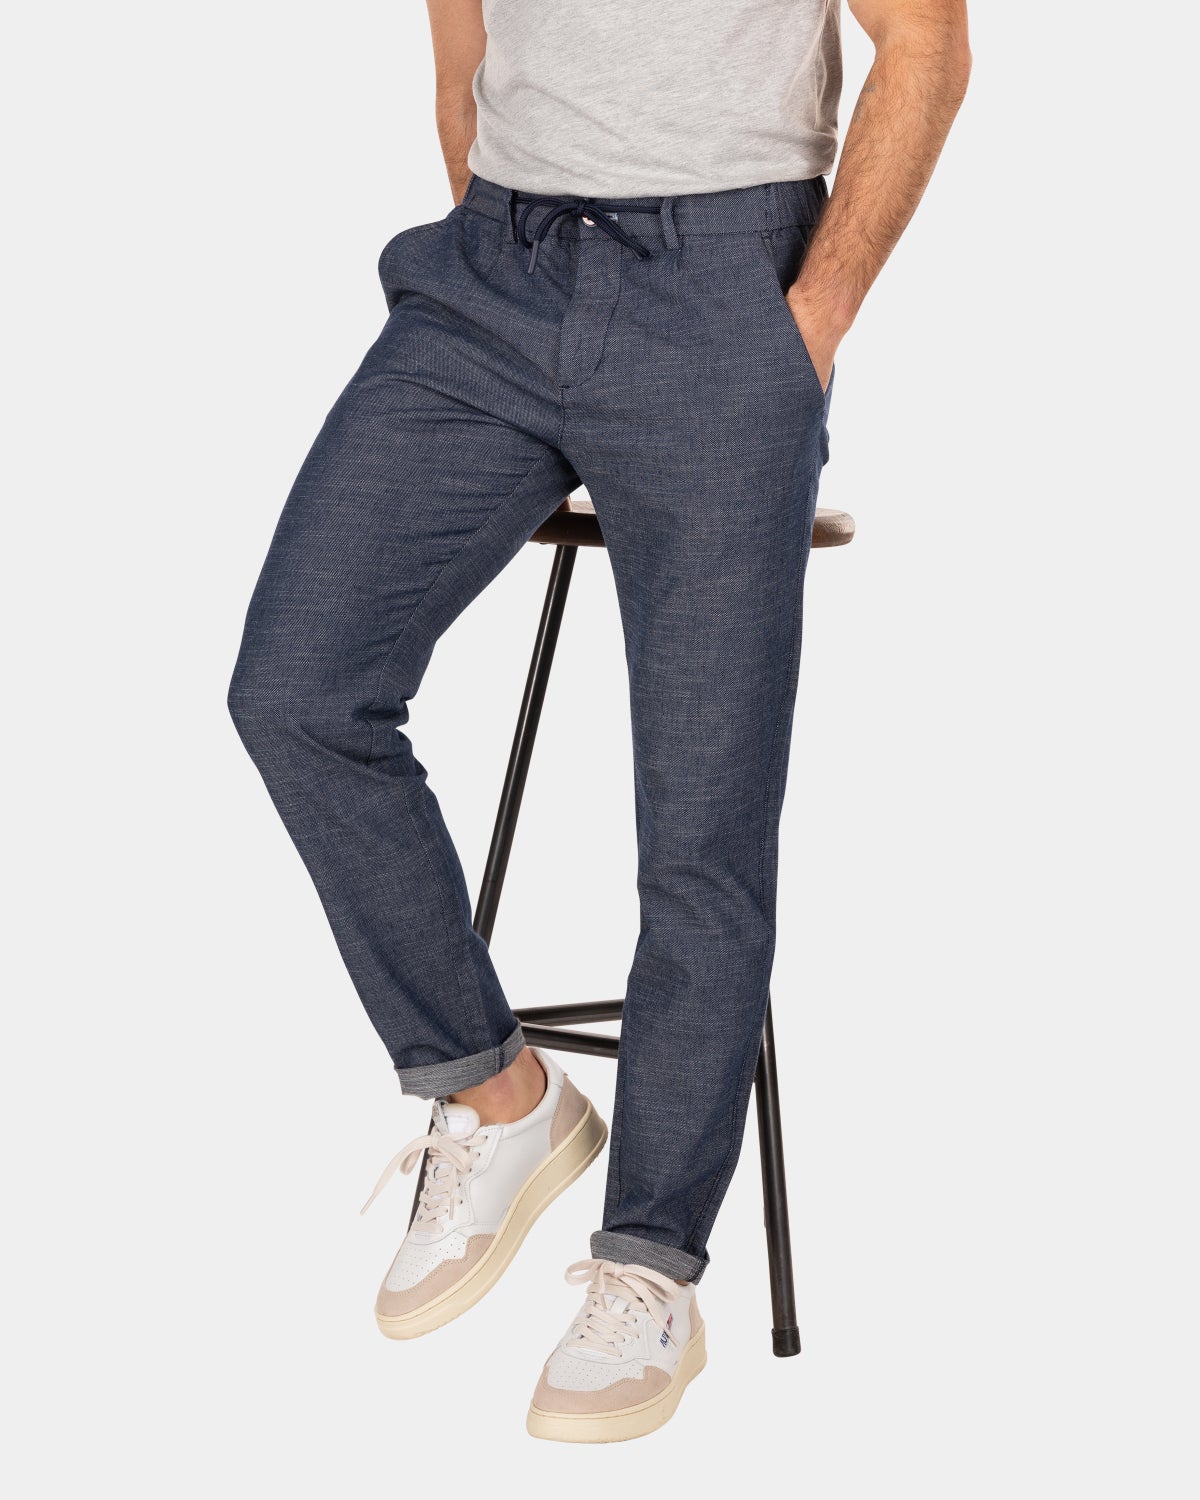 Navy cotton chino  - Traditional Navy